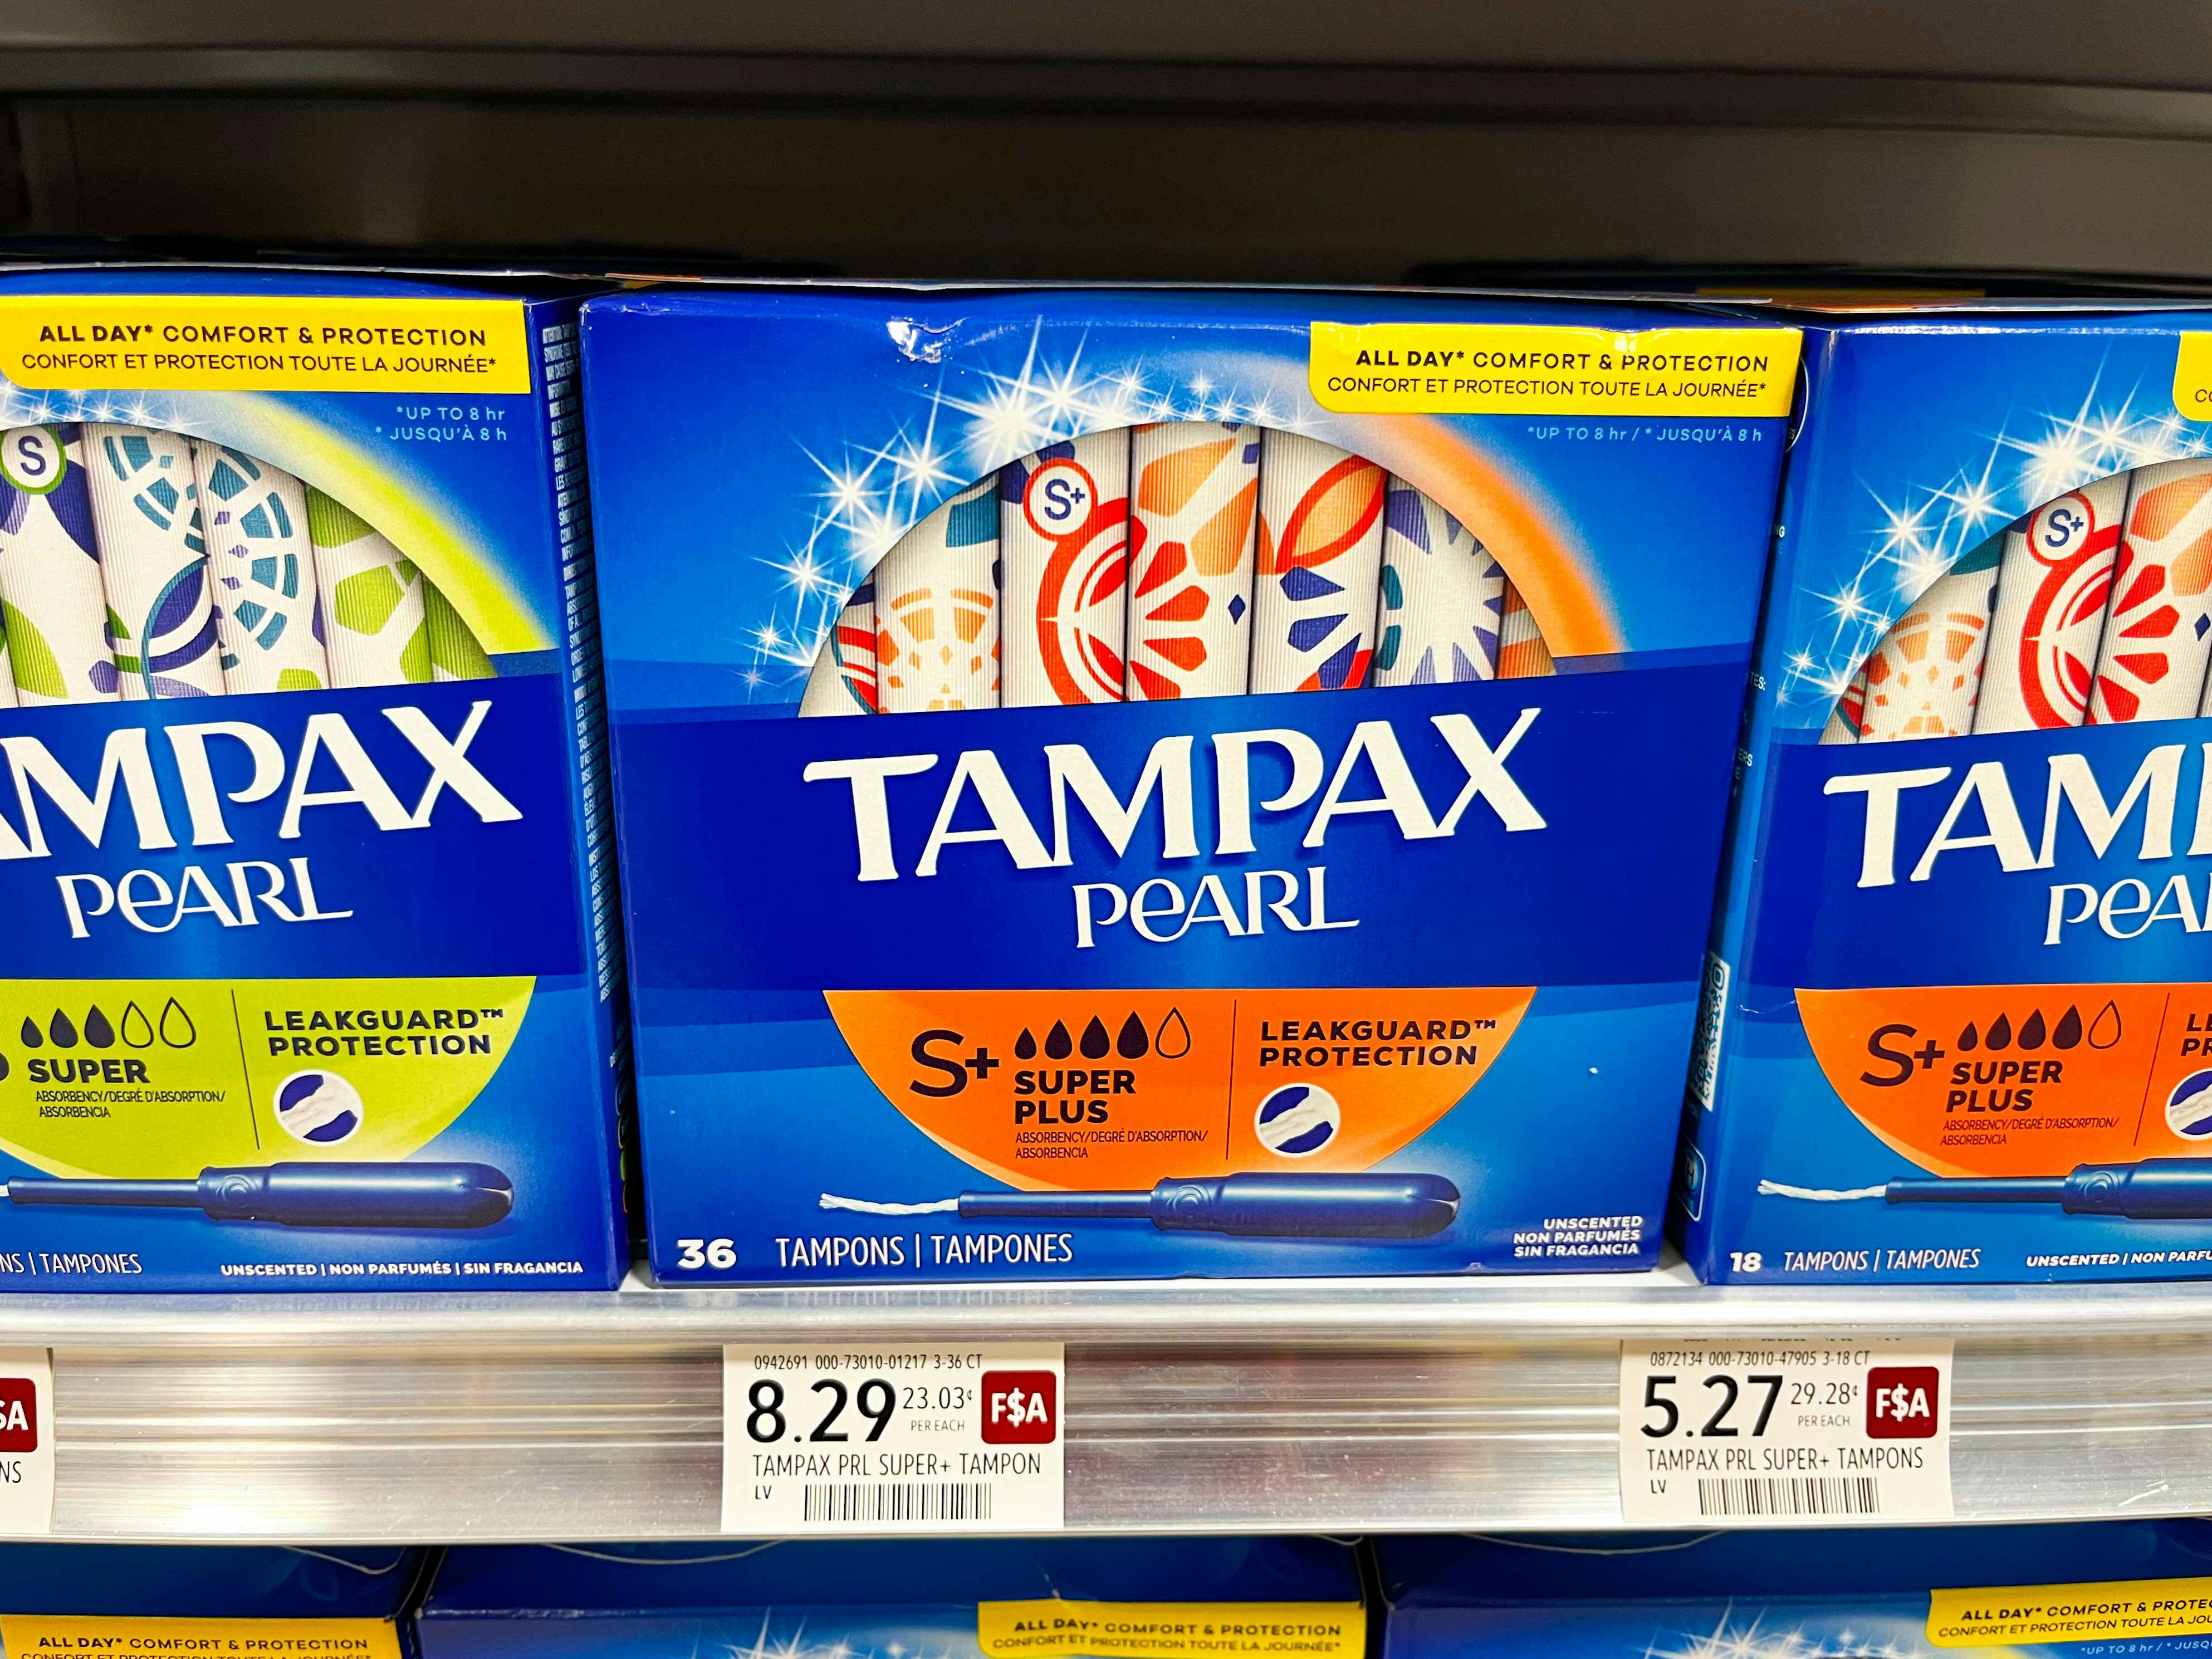 Boxes of Tampax Pearl tampons stocked on a shelf at Publix.